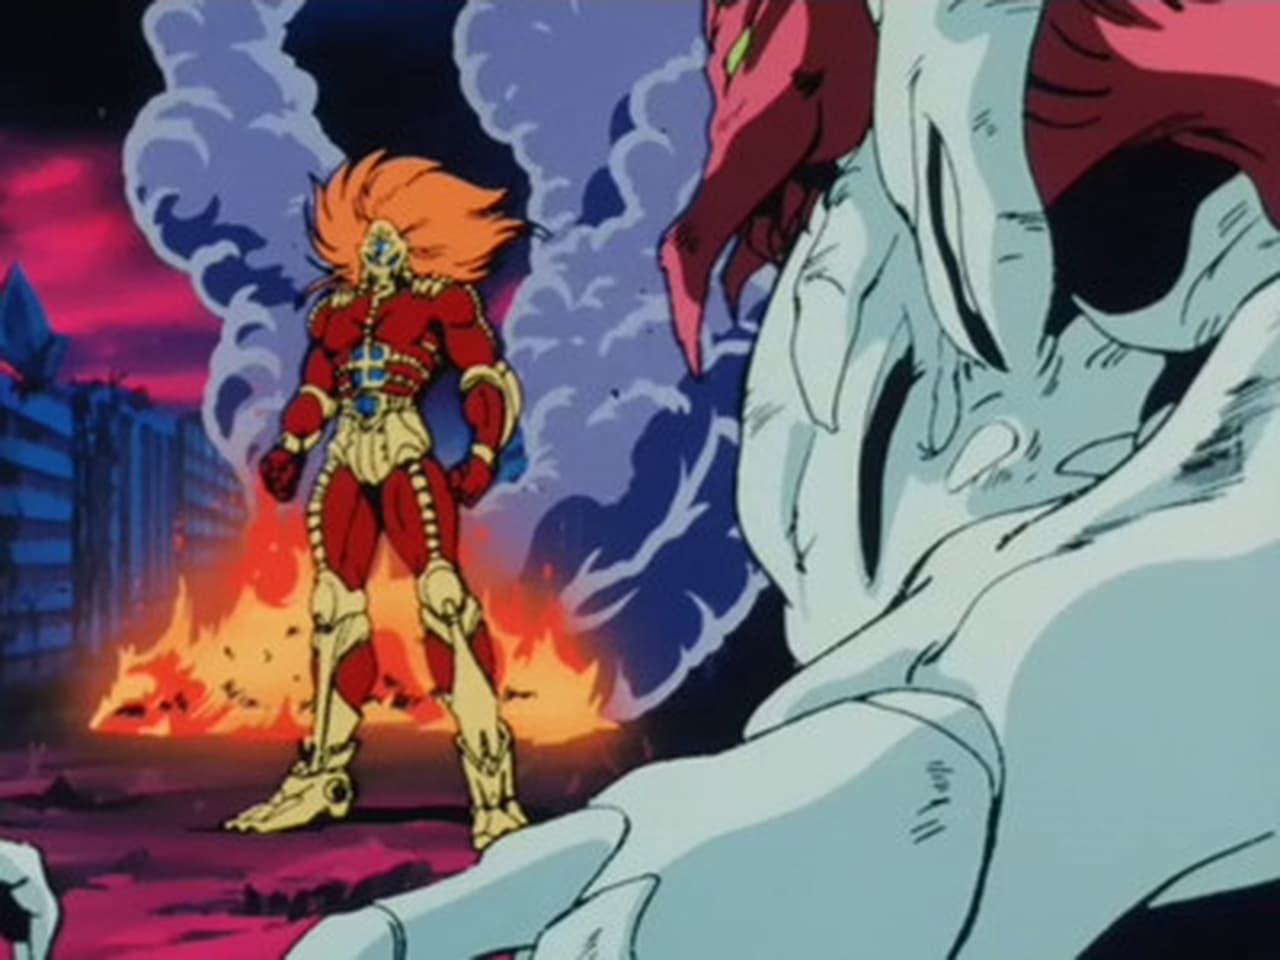 The Raging Bio Armor Liger appears